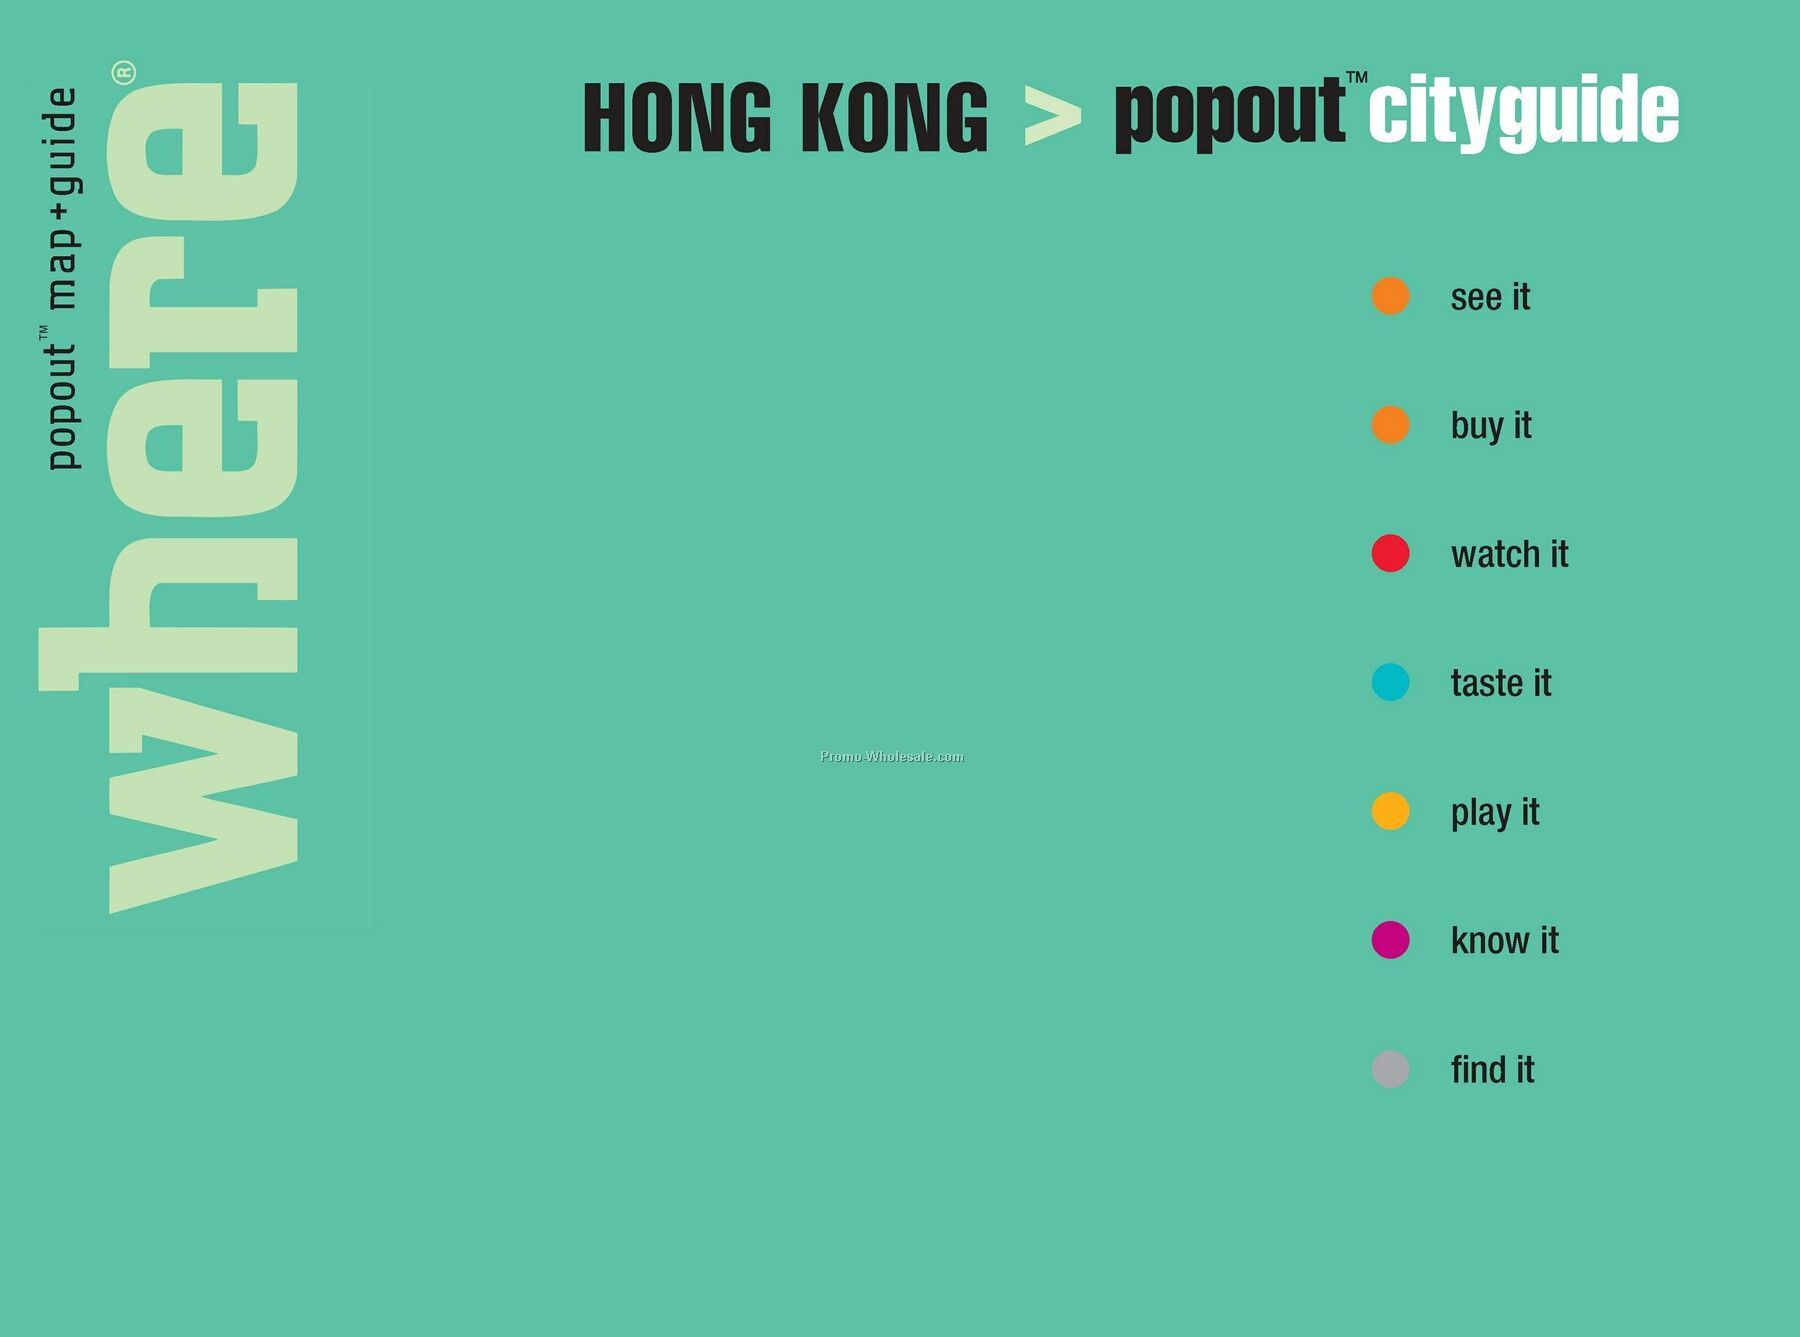 Travel Guides - International Guide Of Hong Kong - Featuring Popout Maps